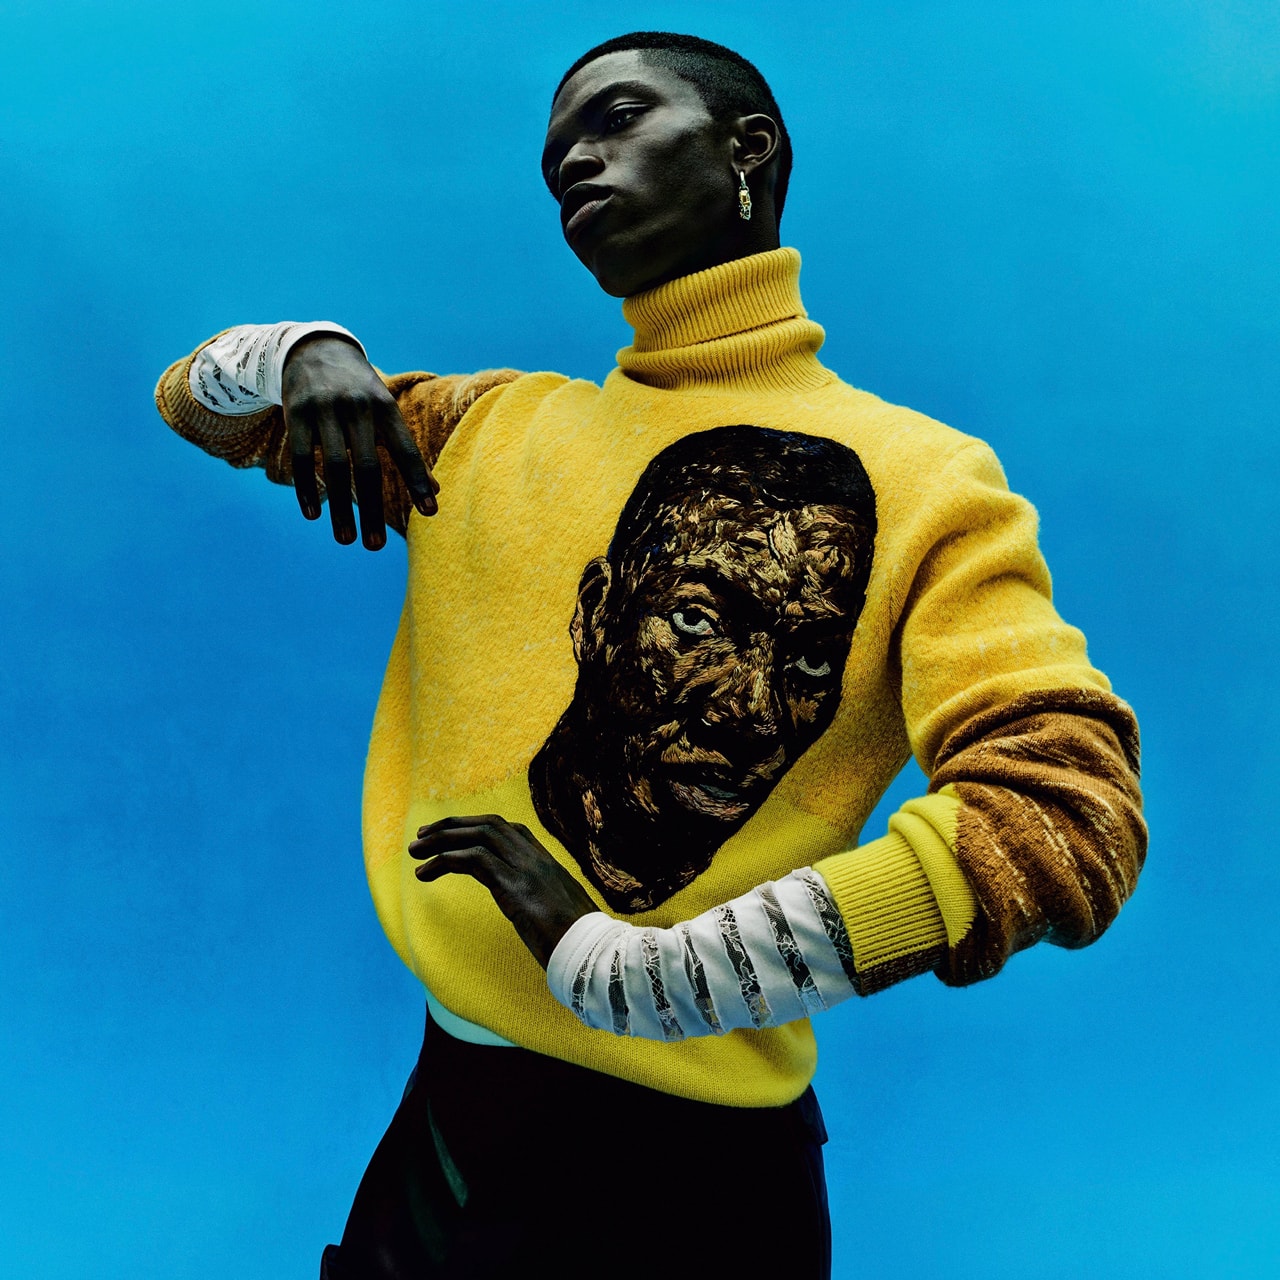 Dior French House Portrait Of An Artist Summer 2021 Kim Jones Amoako Boafo Africa textiles rich cultural history ribbed kints sportswear tailoring Jacquard patterns silhouettes Chris Cunningham London Ghana Jackie Nickerson Rubell Museum textures colors hues blue green yellow shirts sweaters basque berets scarves embrodiery ribbed knits paintings art